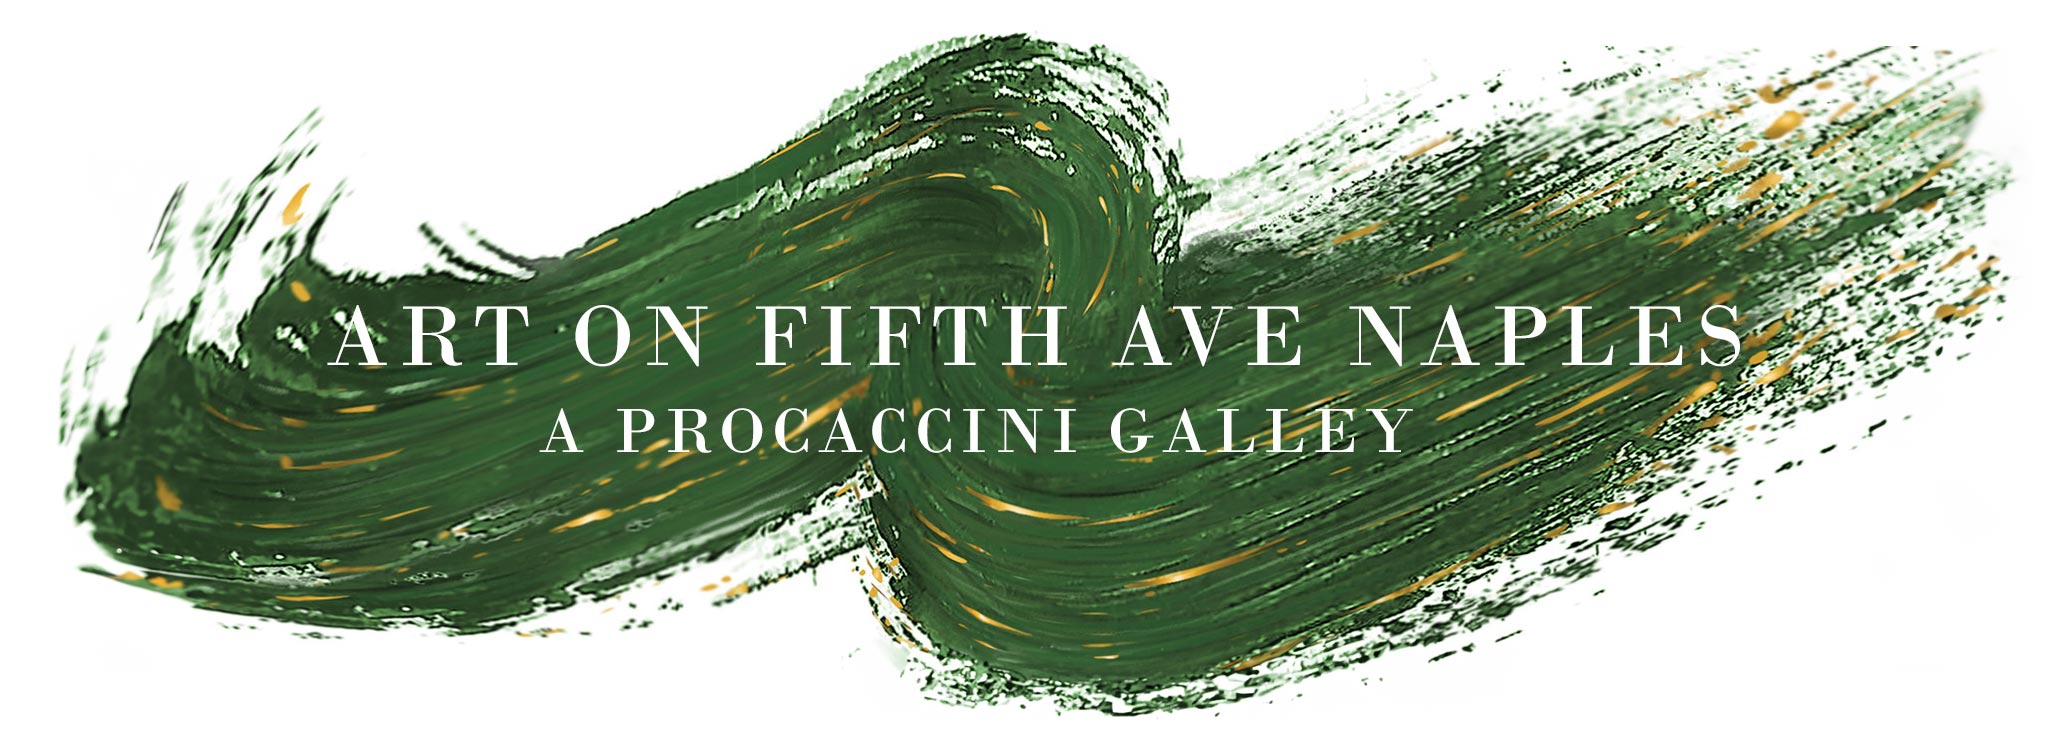 Art On Fifth Ave Naples